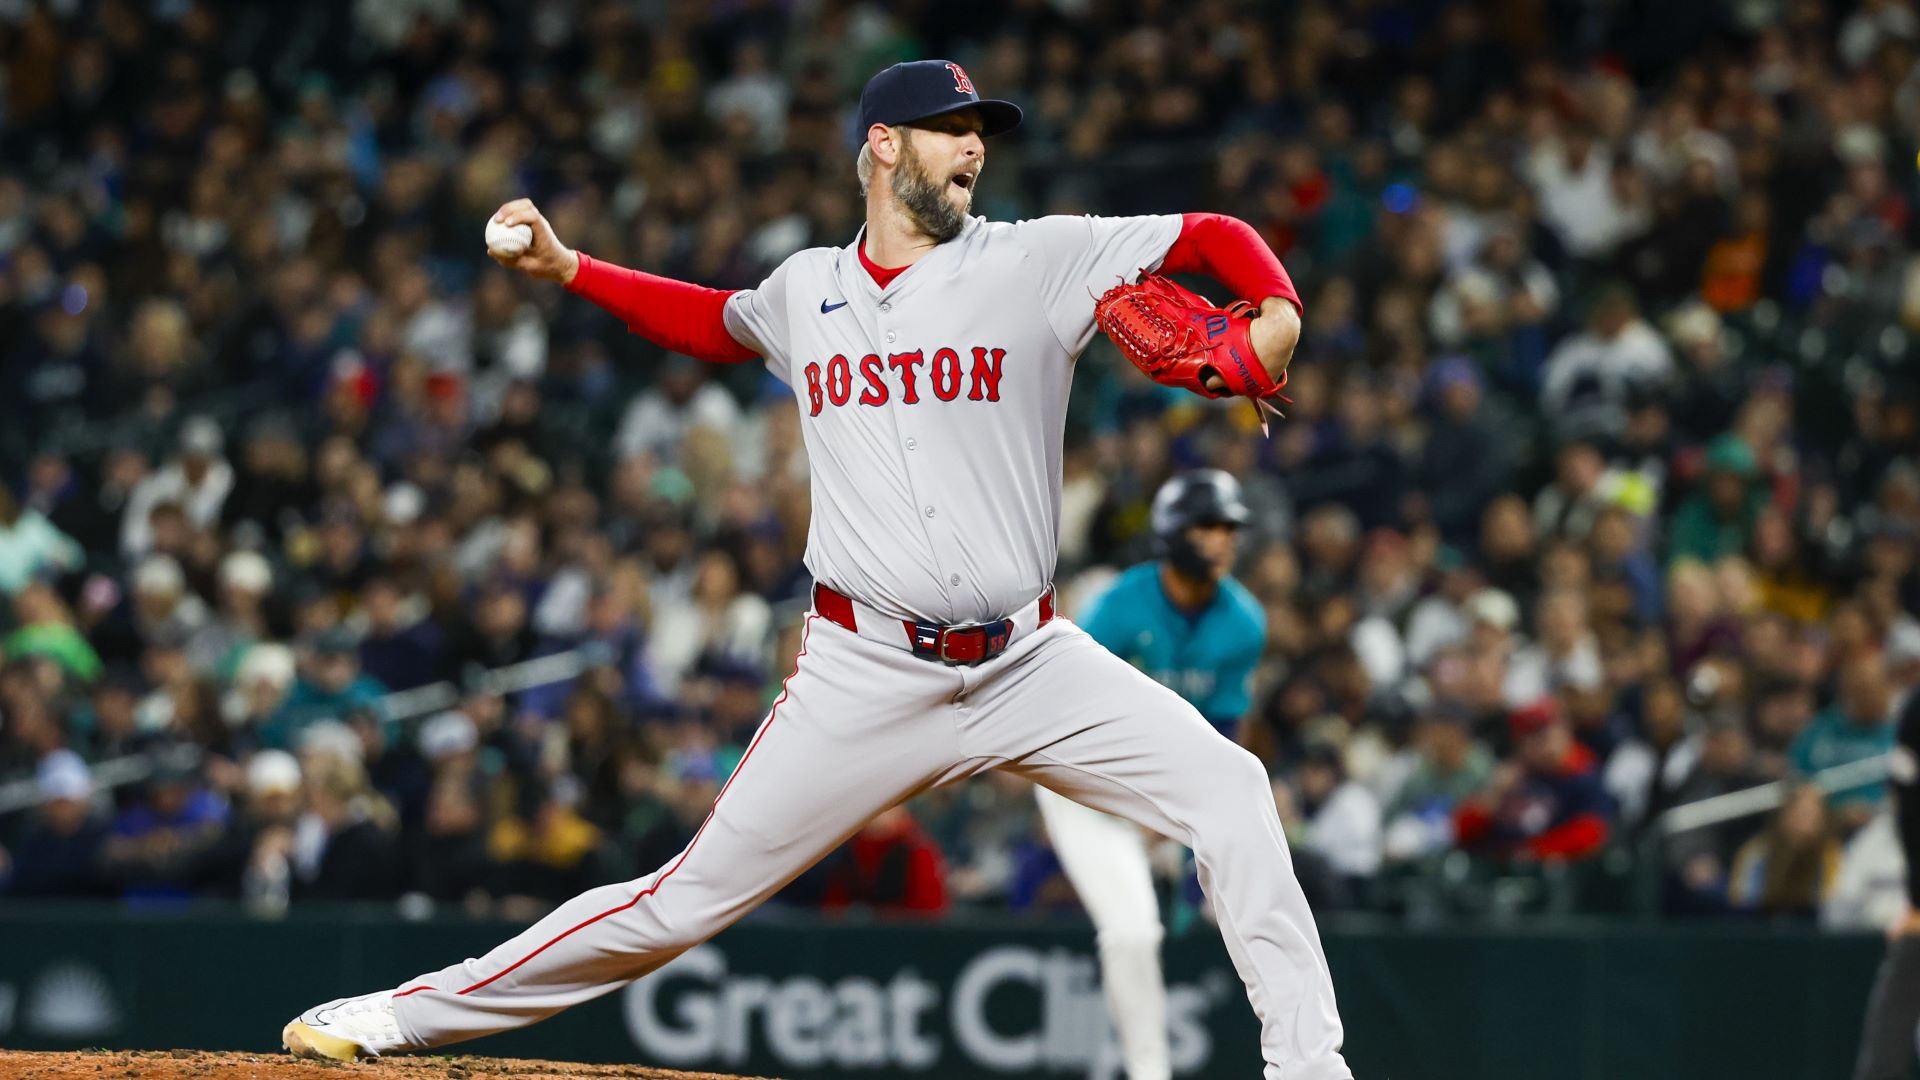 Injury To Red Sox Reliever Prevented Him From Pitching Vs. Angels